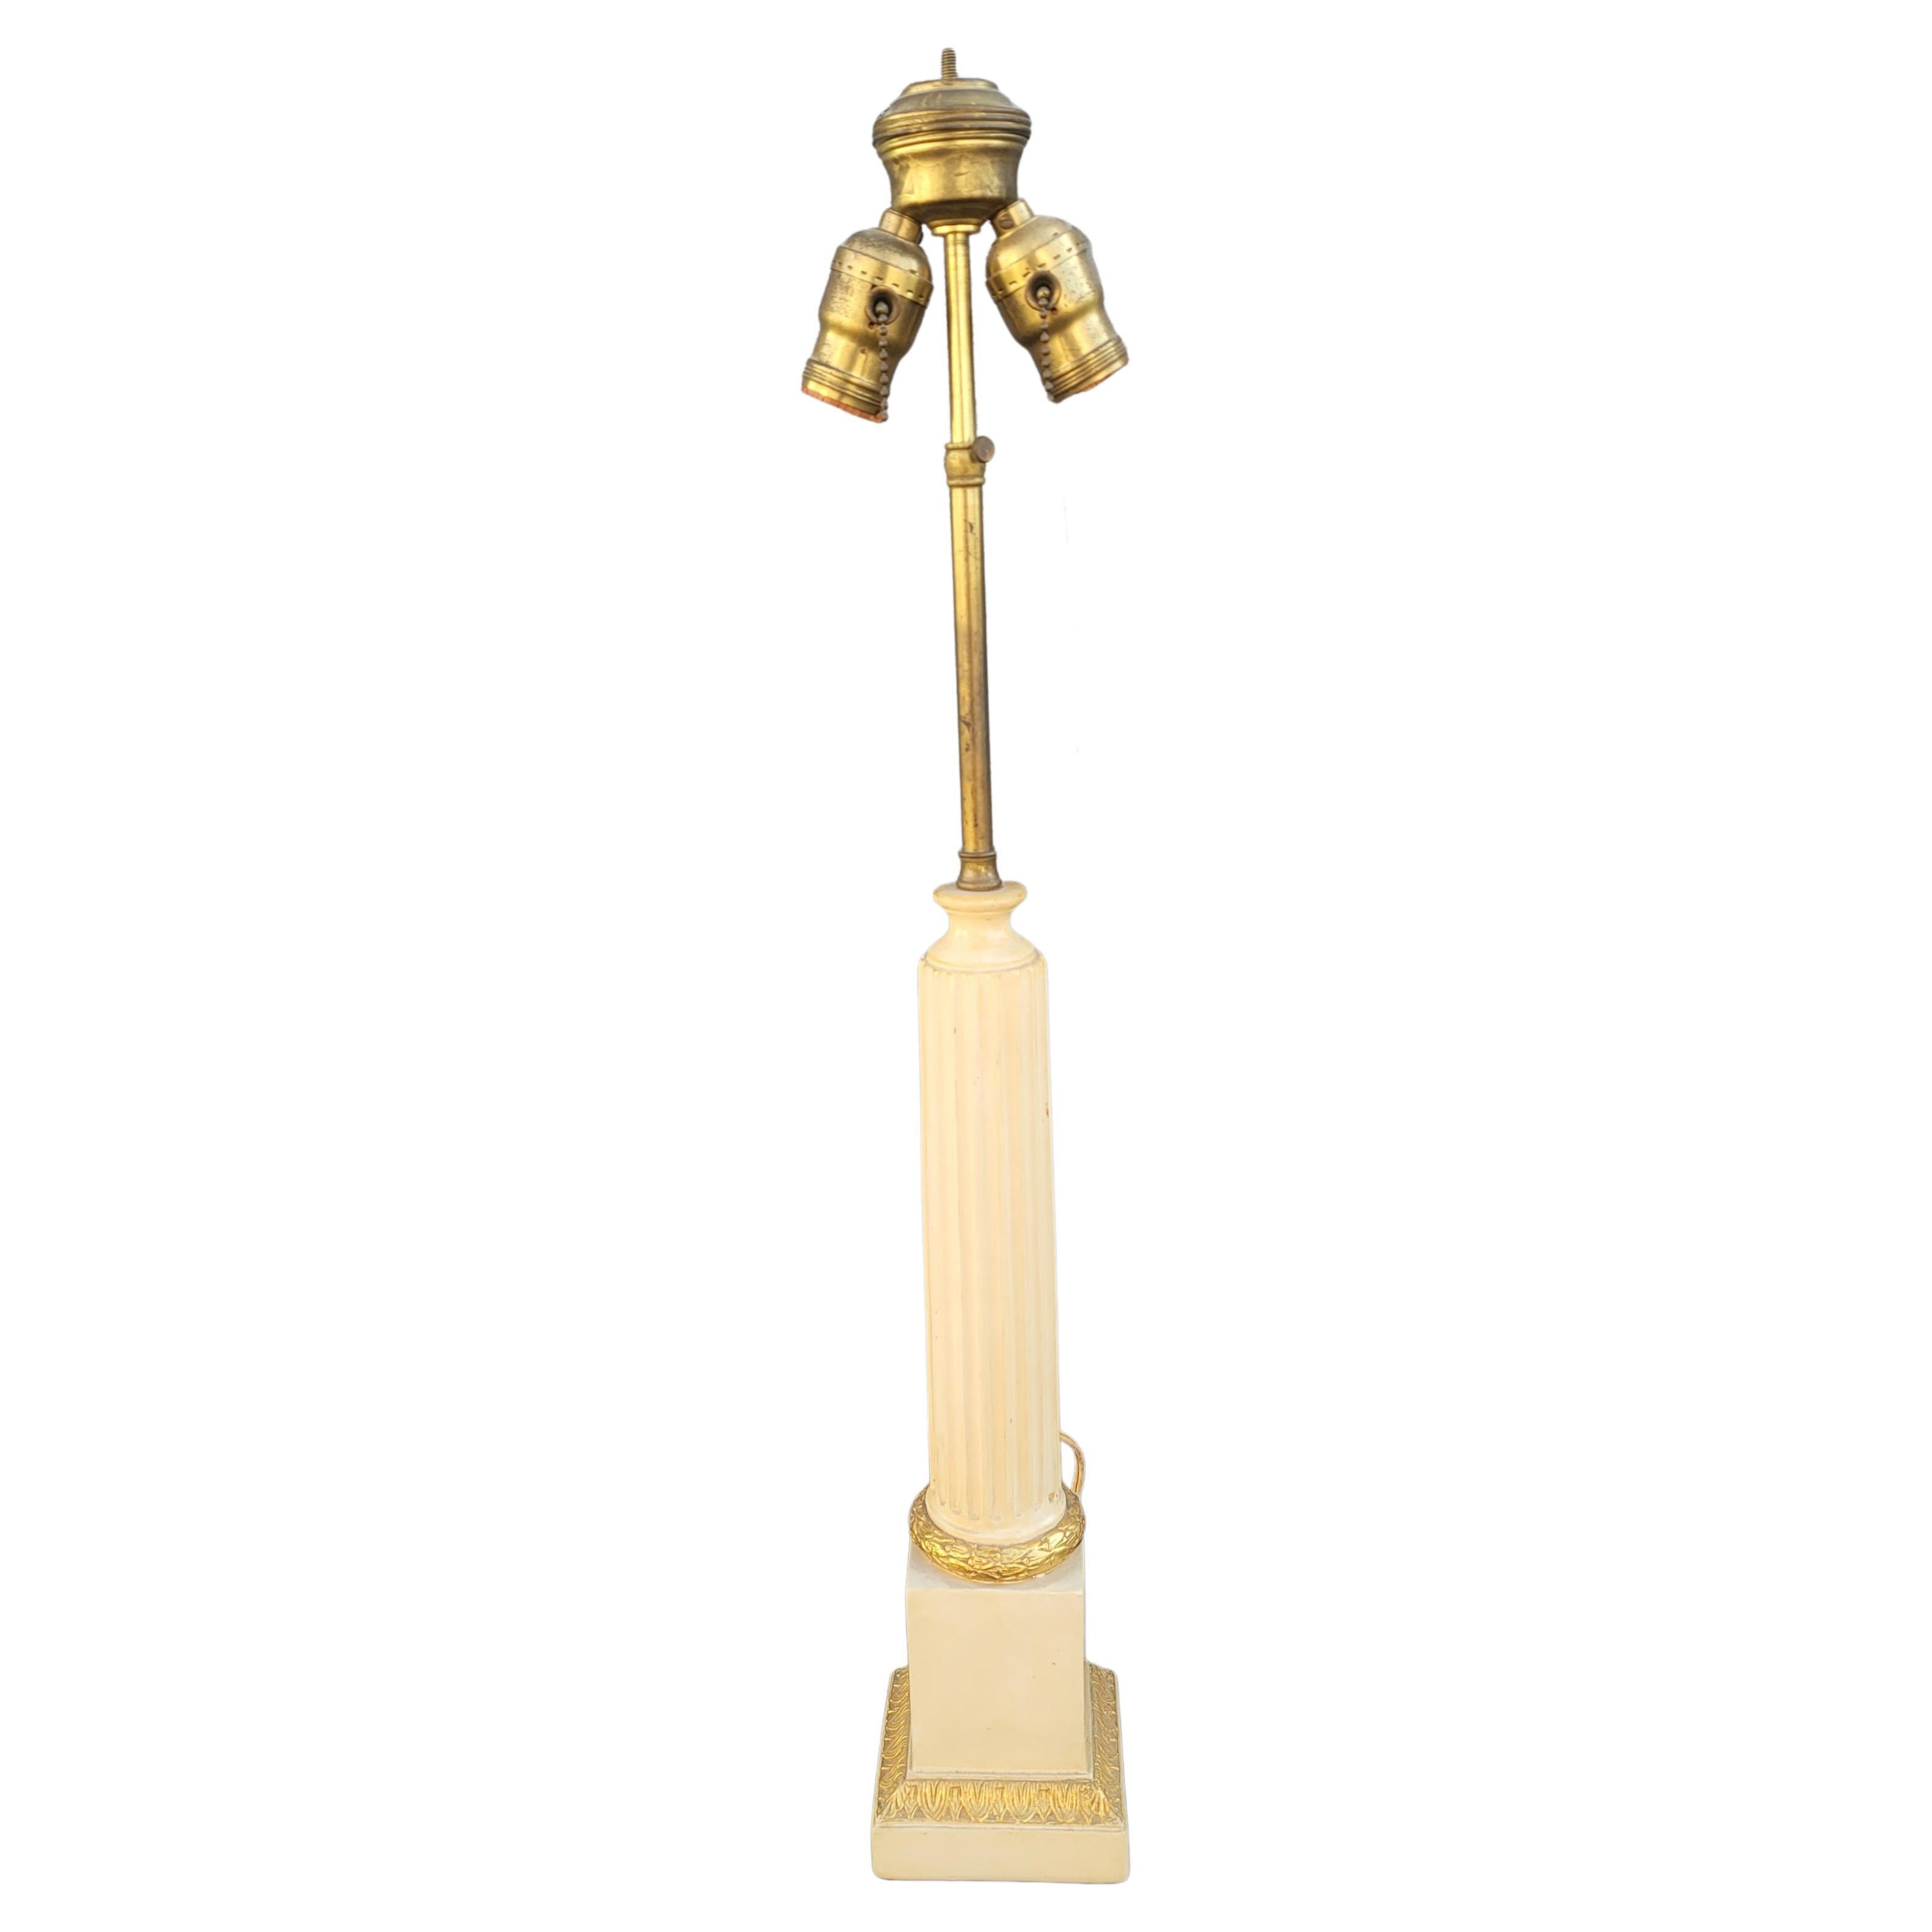 A Pair of Italian Art Deco Patinated and Gilt Ornate Plaster Tower Table Lamps In Good Condition For Sale In Germantown, MD